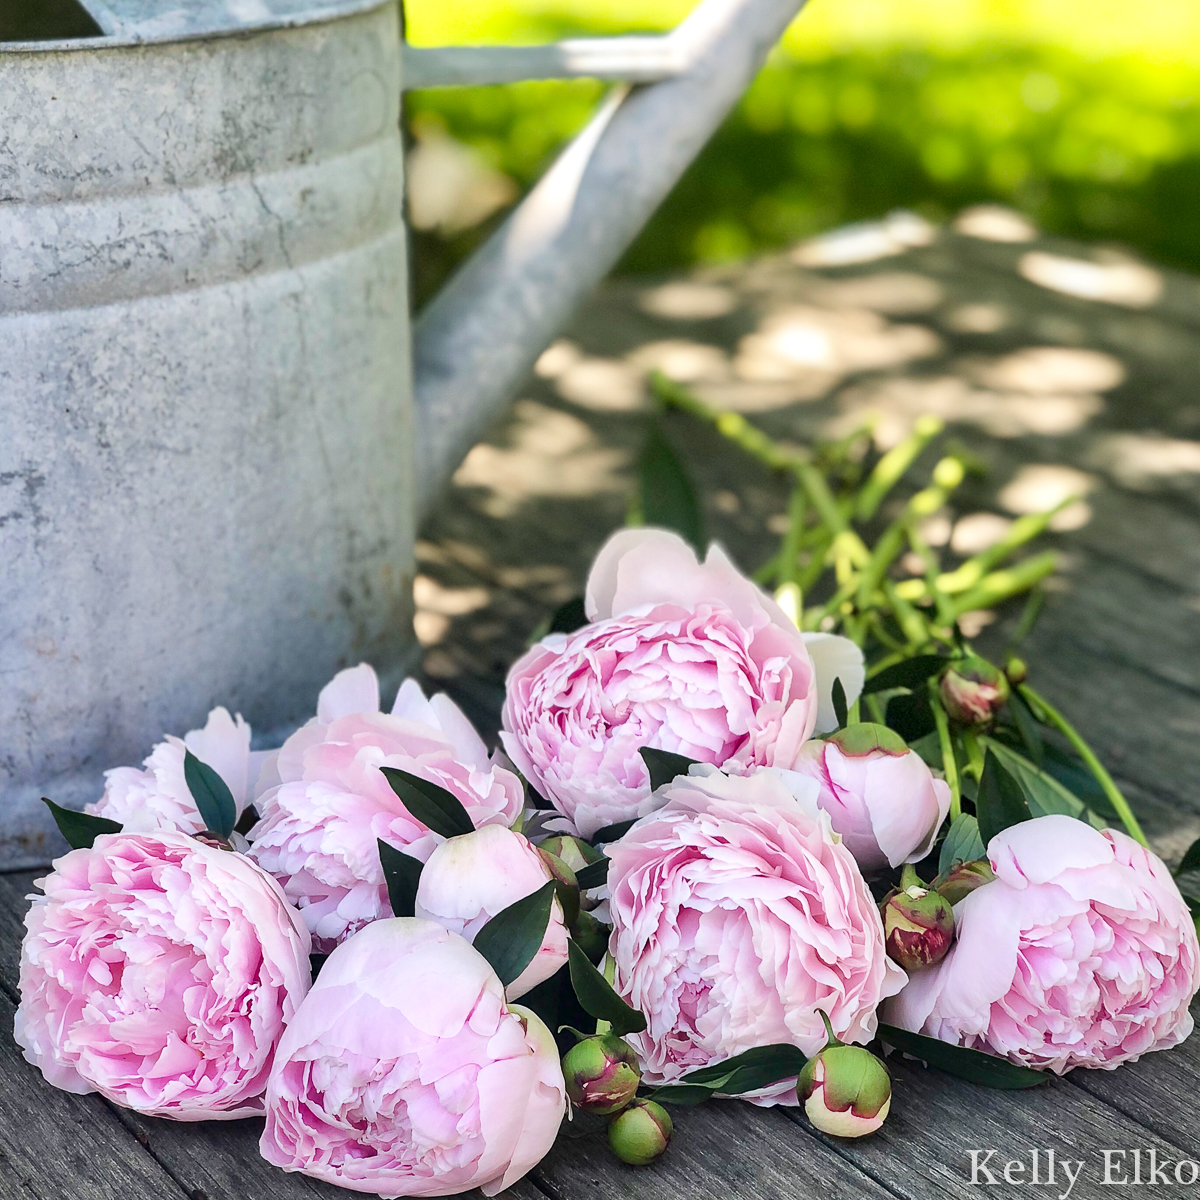 5 Rules for Growing Perfect Peonies – and Peony Overload!